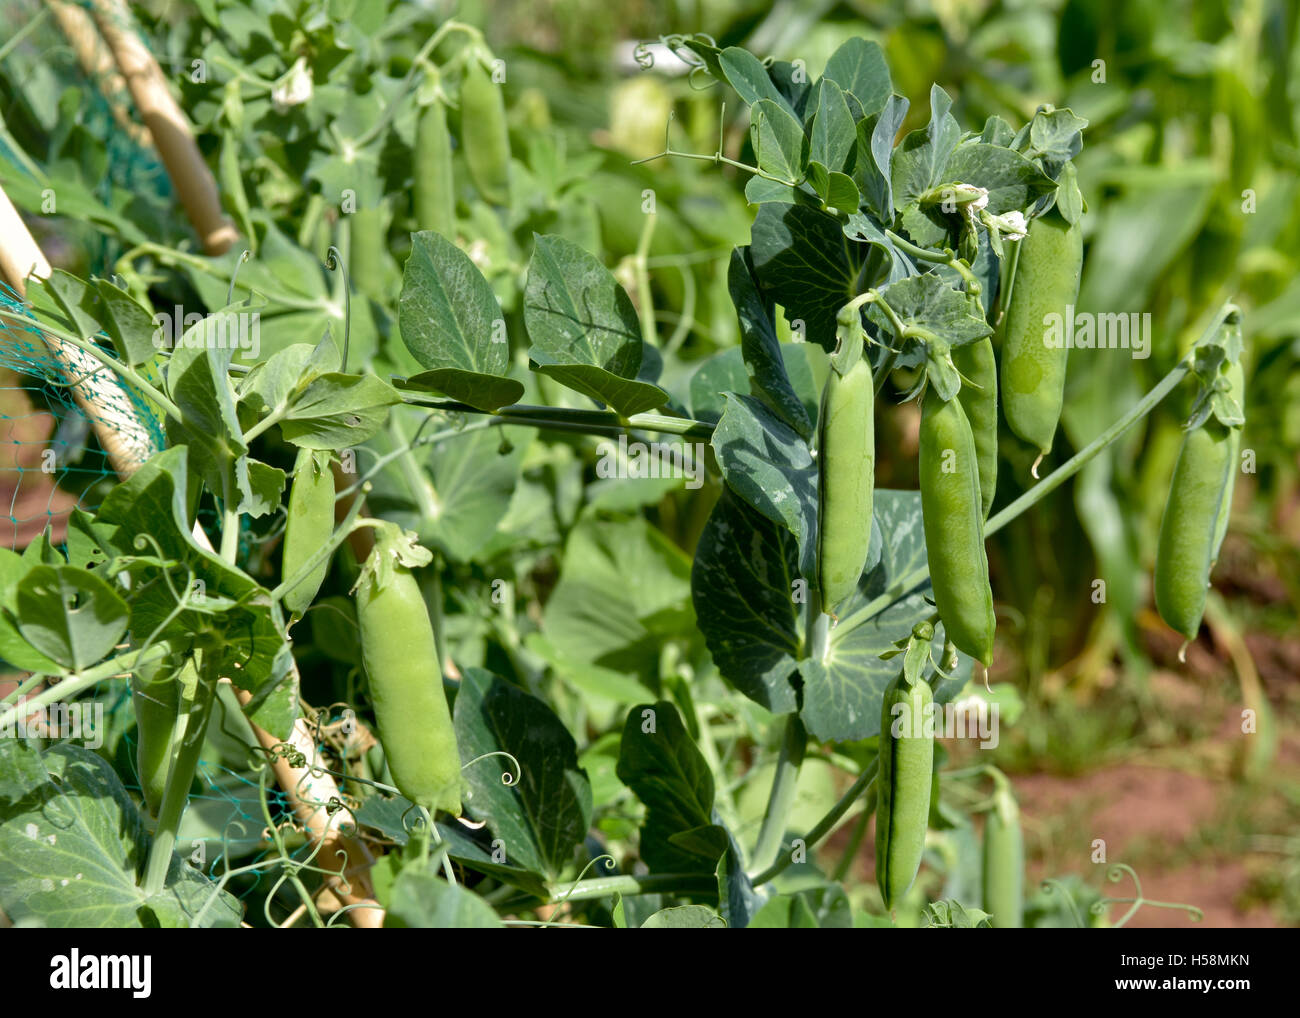 Home grown peas in pods ready for picking Stock Photo